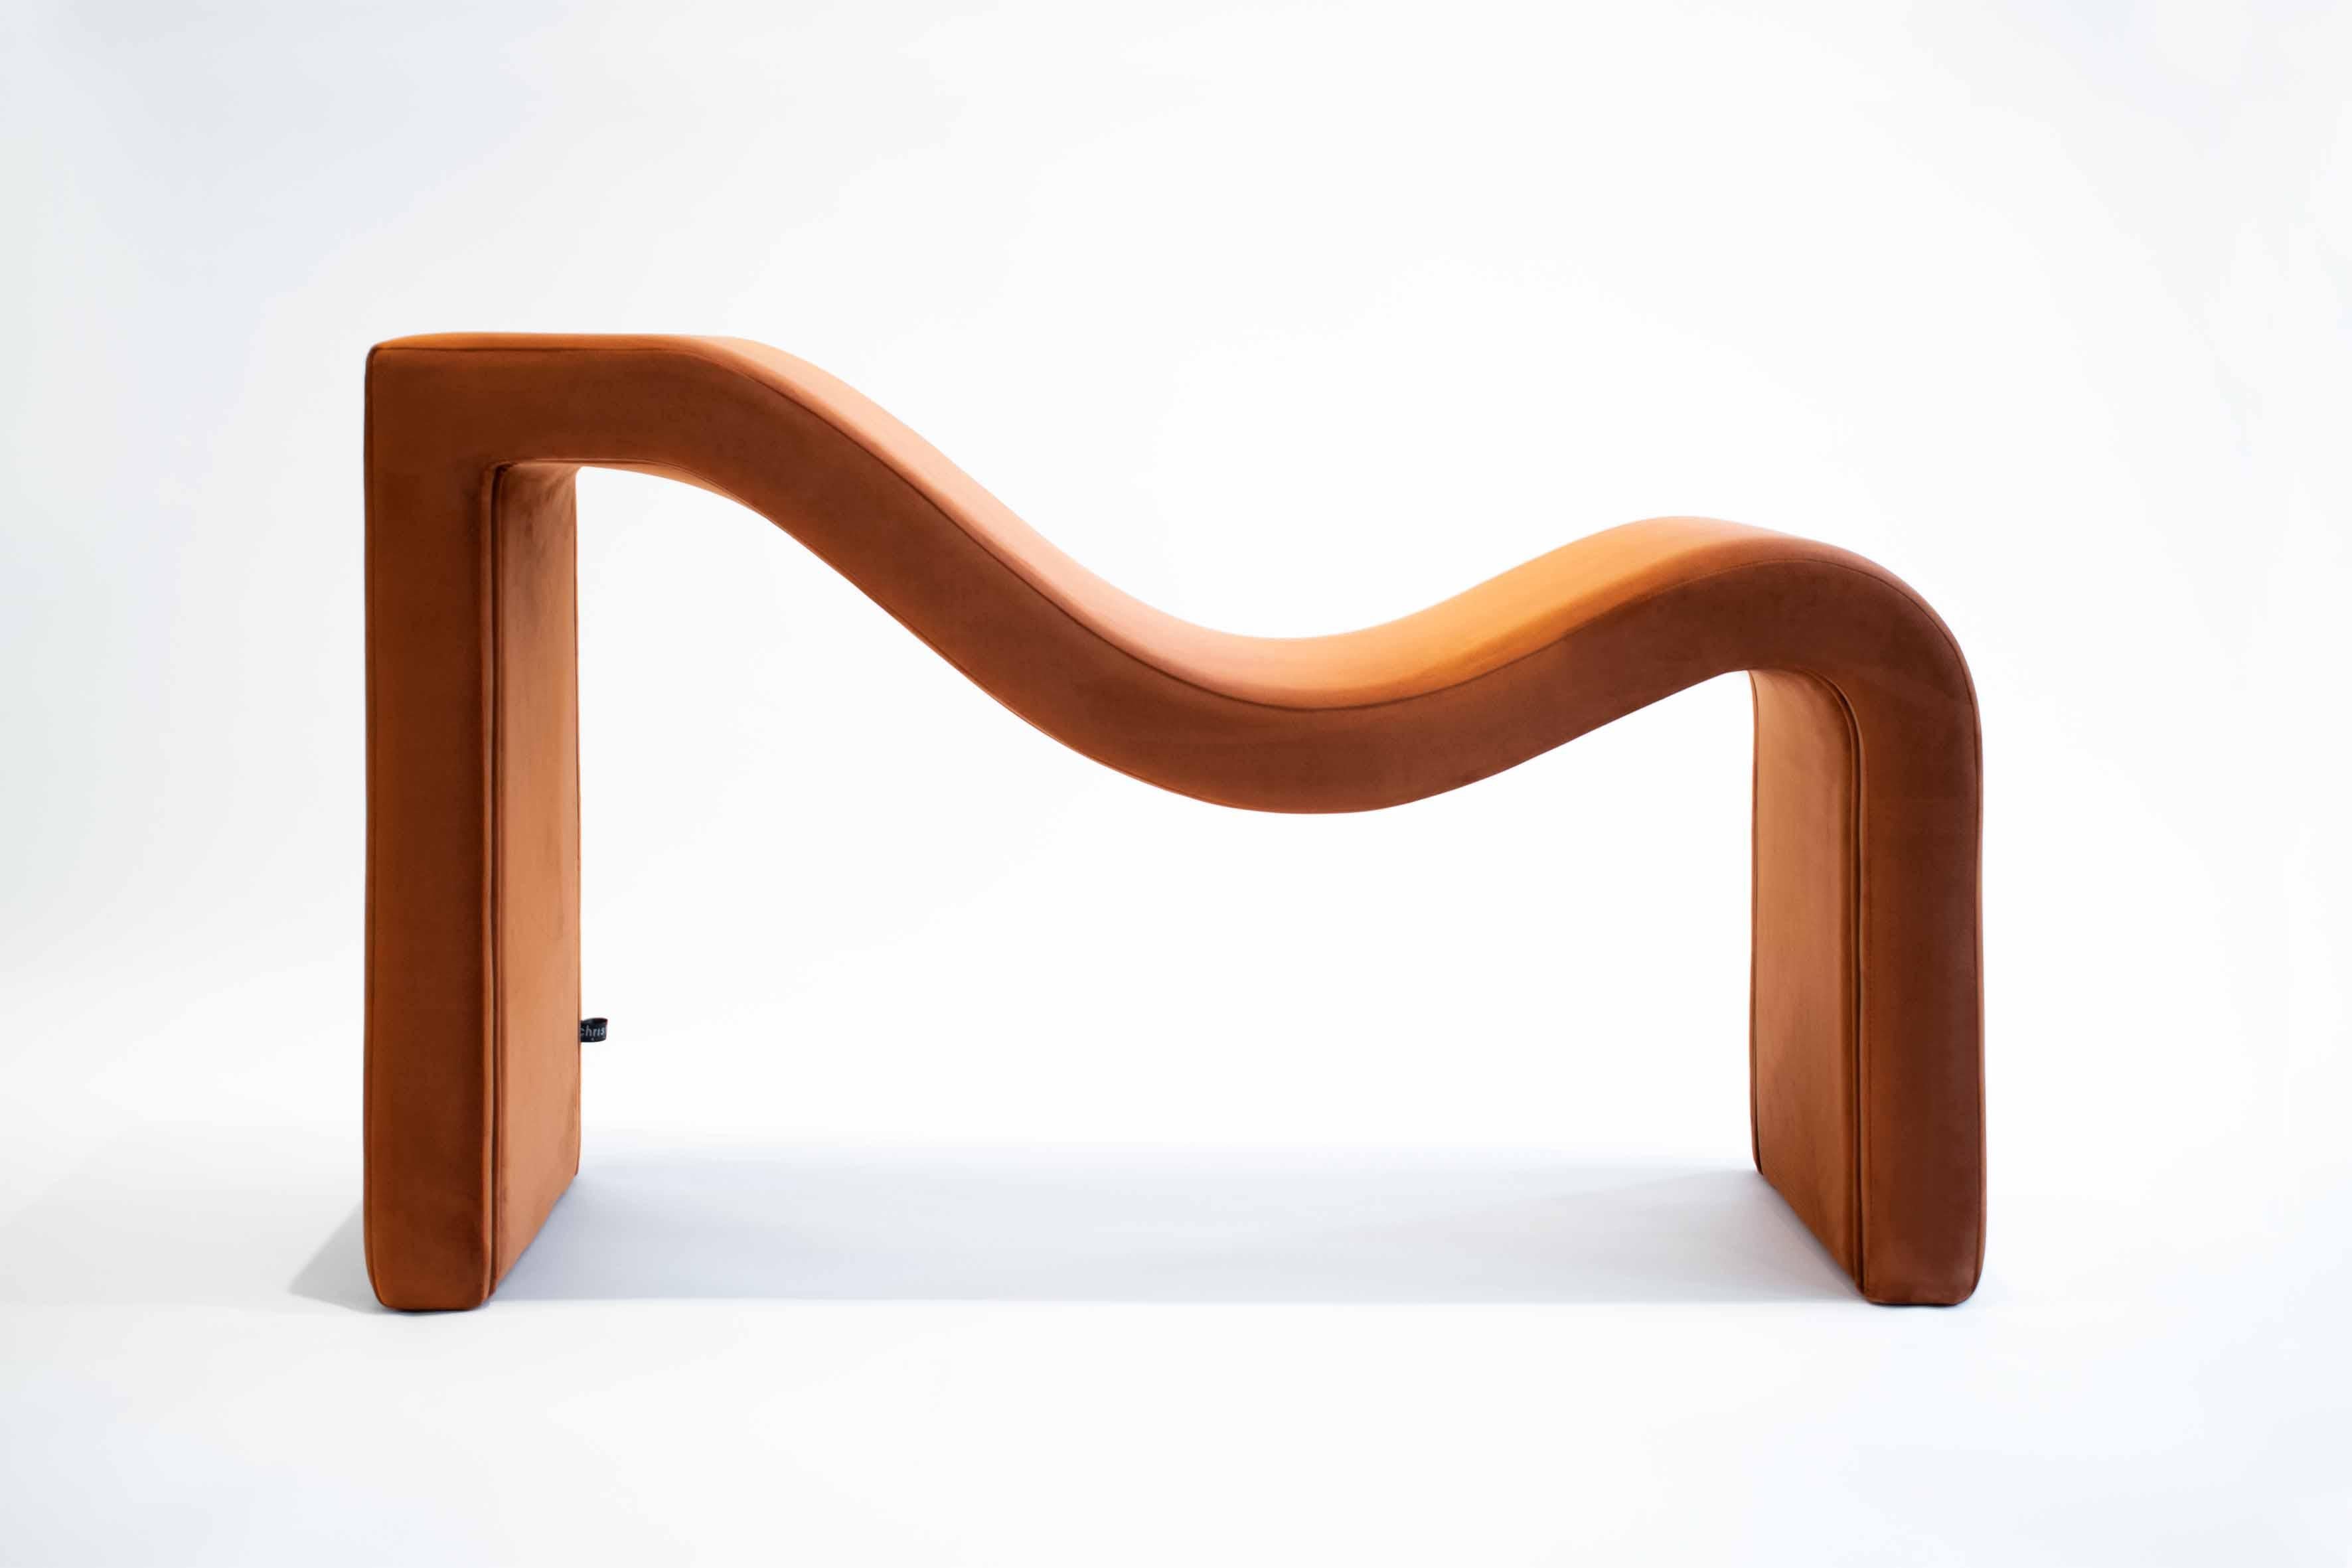 Tide Bench by Studio Christinekalia
Dimensions: W 40 x D 180 x H 45 cm
Materials: Wood, Macro Plush Fabric. 

Christine Kalia is a design studio exploring modes of spatial relations between architectural, interior and product design. The